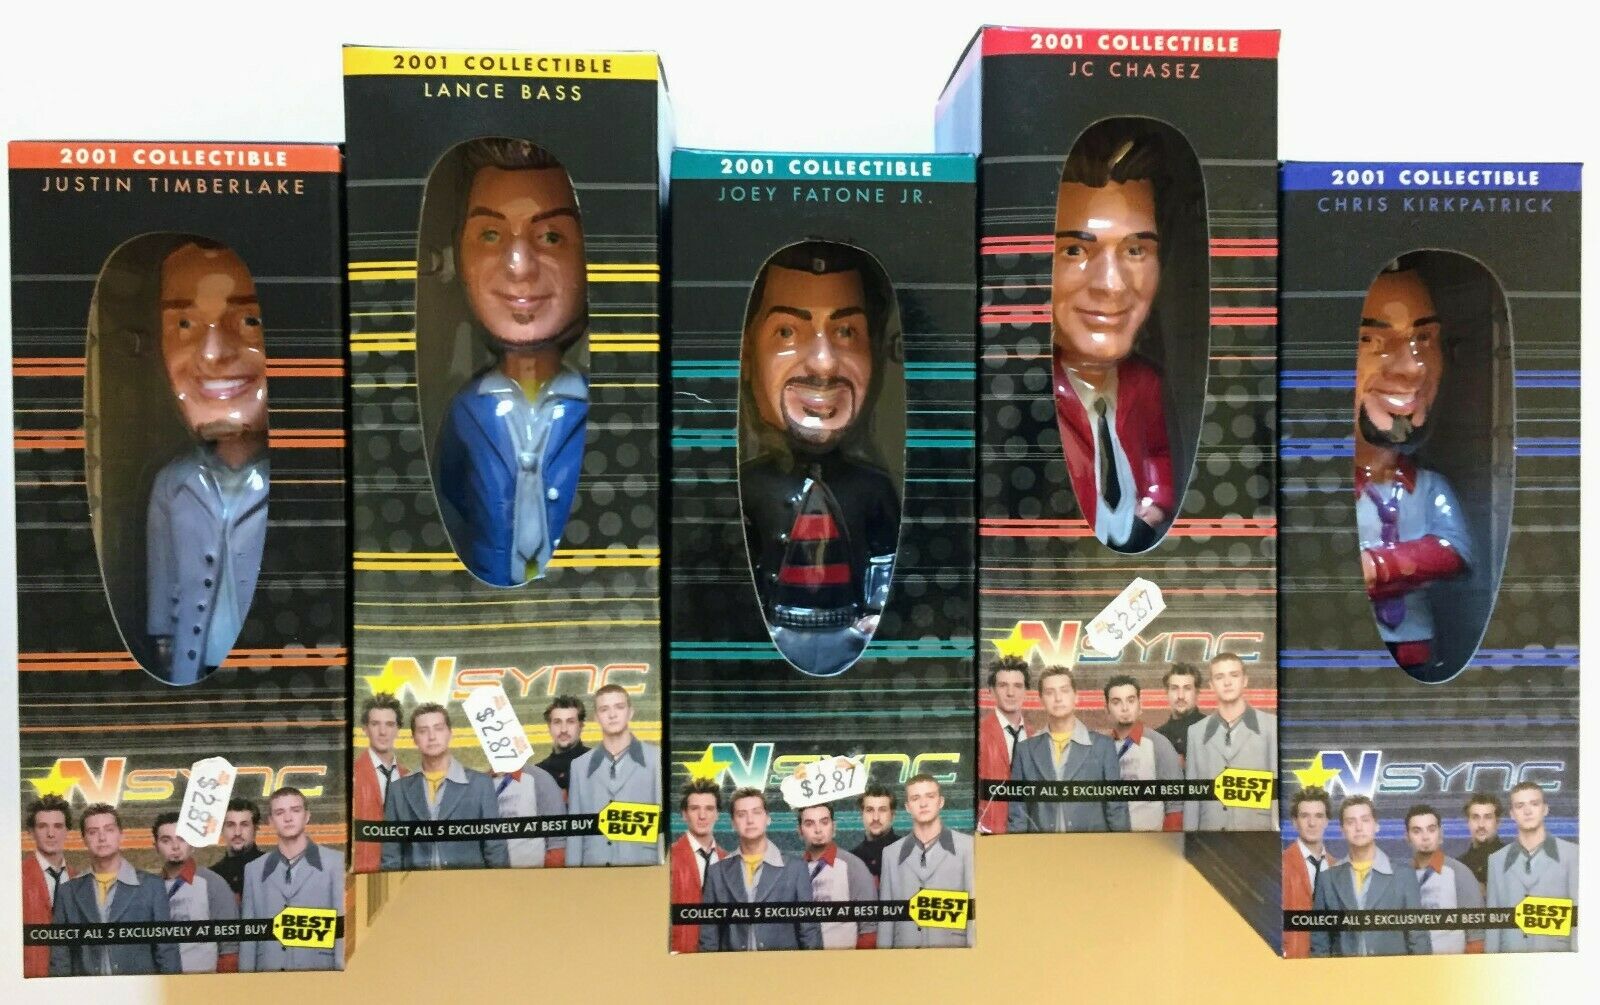 Nsync Best Buy 2001 Collectible Bobbleheads Full Set Of 5 Justin, Lance...new